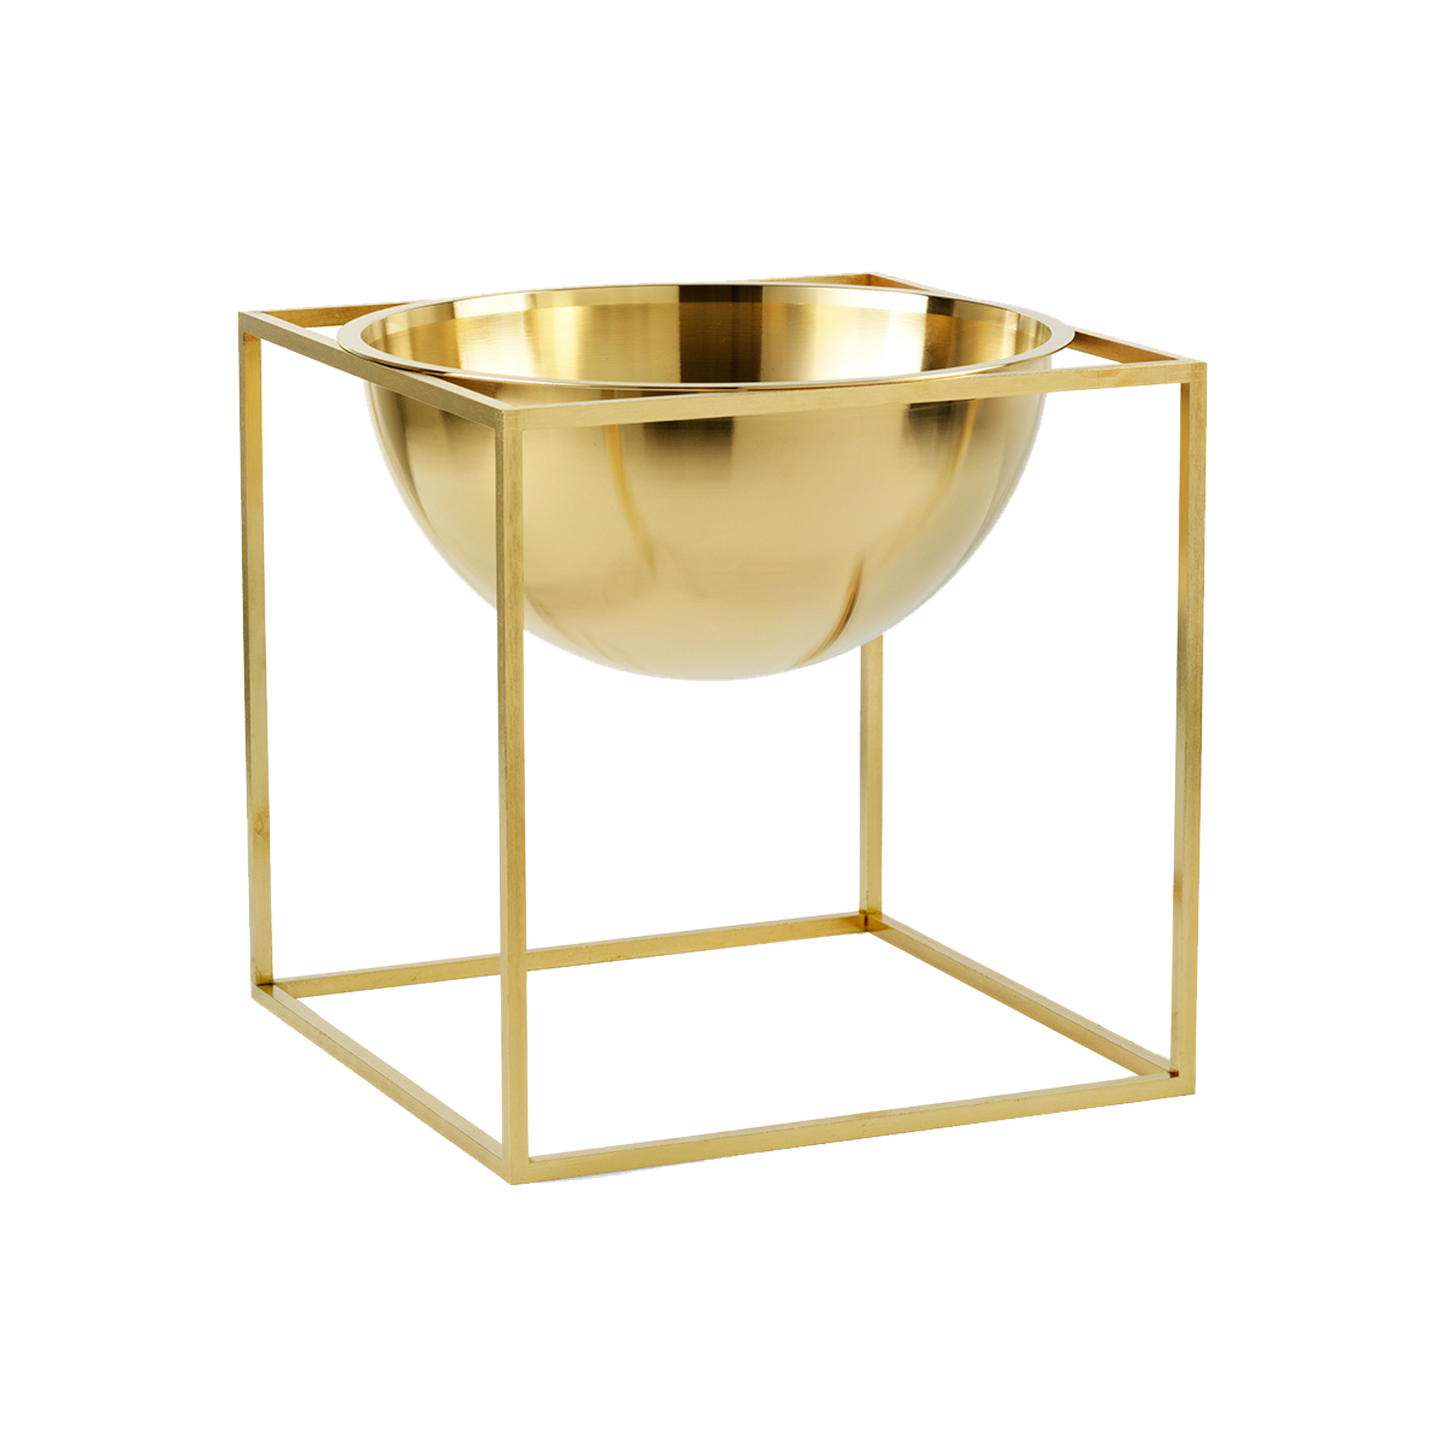 Bowl Large by Audo #Gold Plated